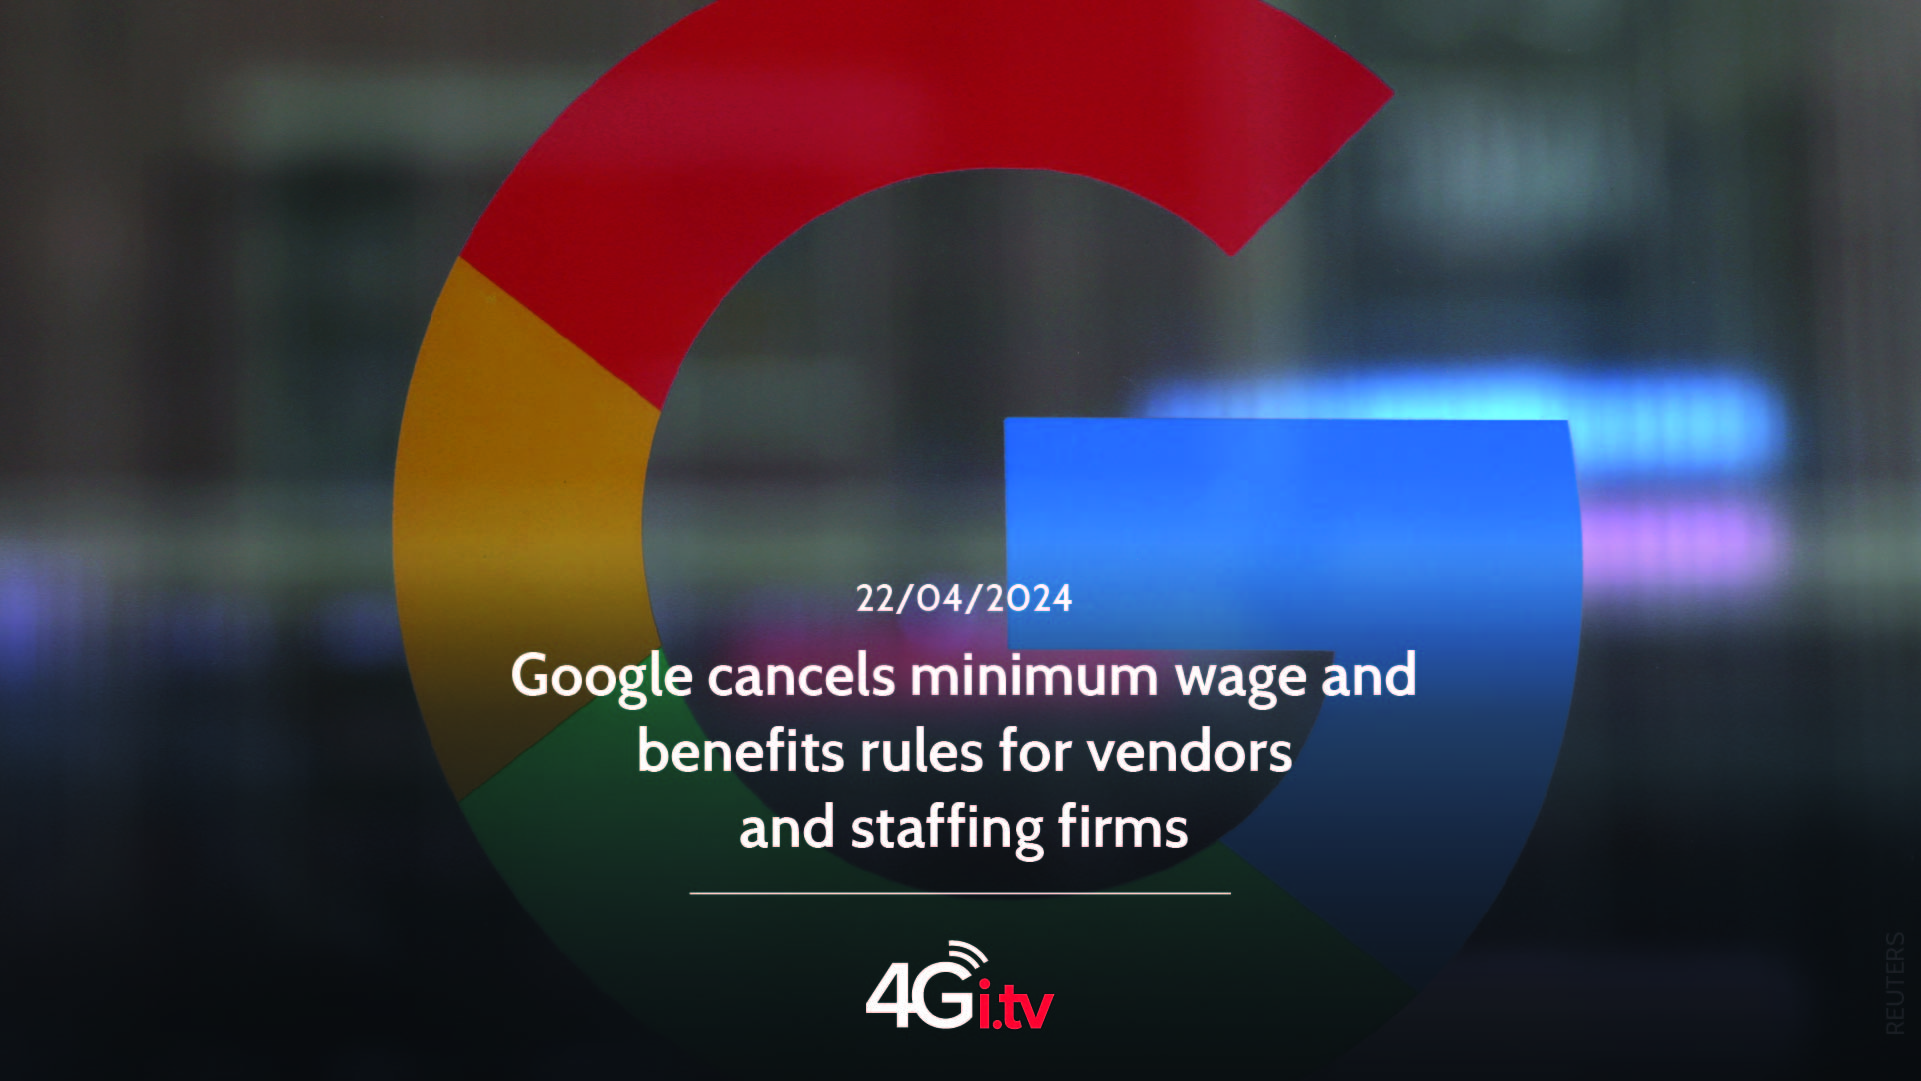 Lesen Sie mehr über den Artikel Google cancels minimum wage and benefits rules for vendors and staffing firms